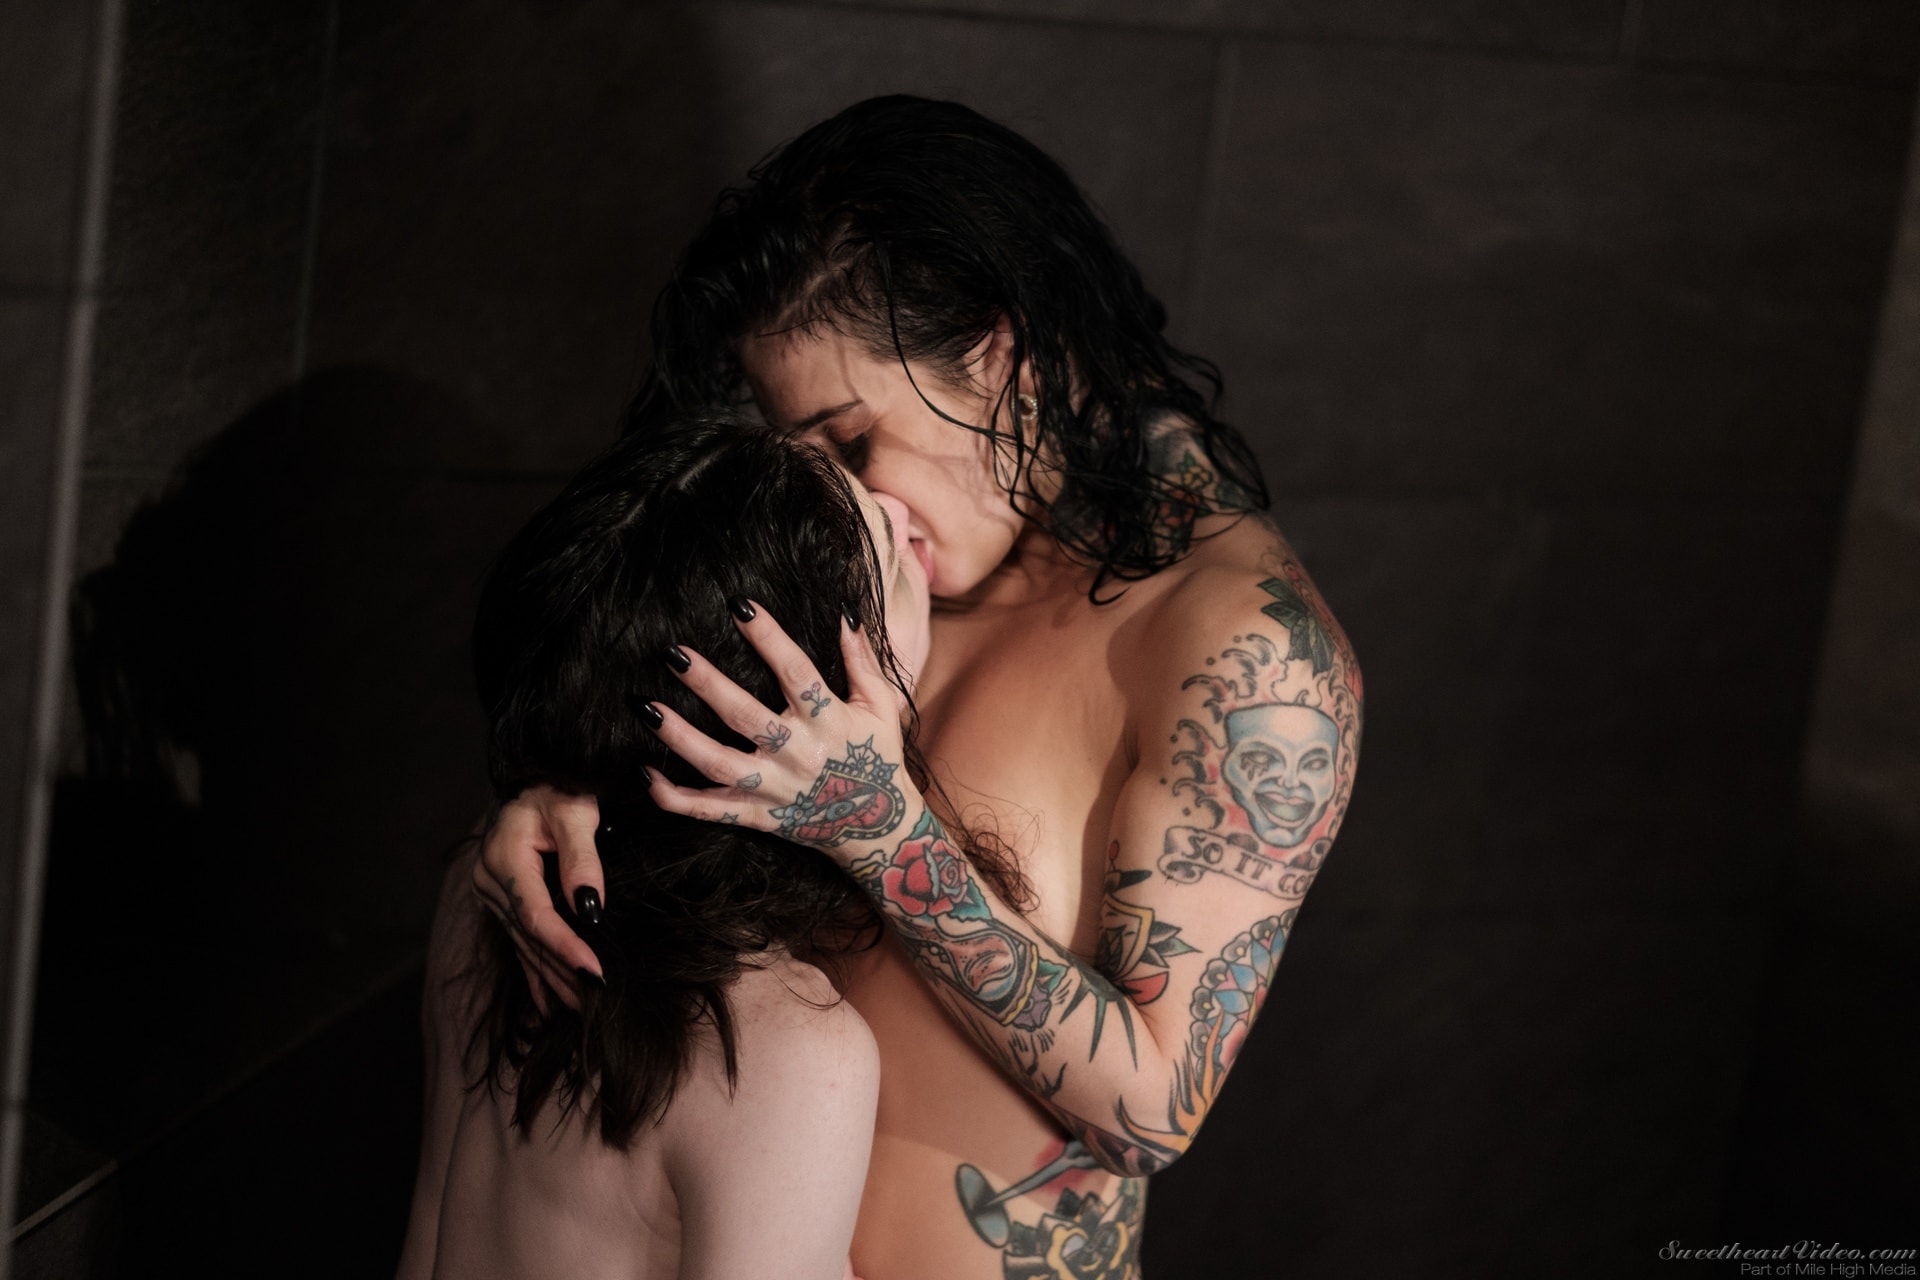 Sweetheart Video 'Ex's and Oh's!' starring Joanna Angel (Photo 60)